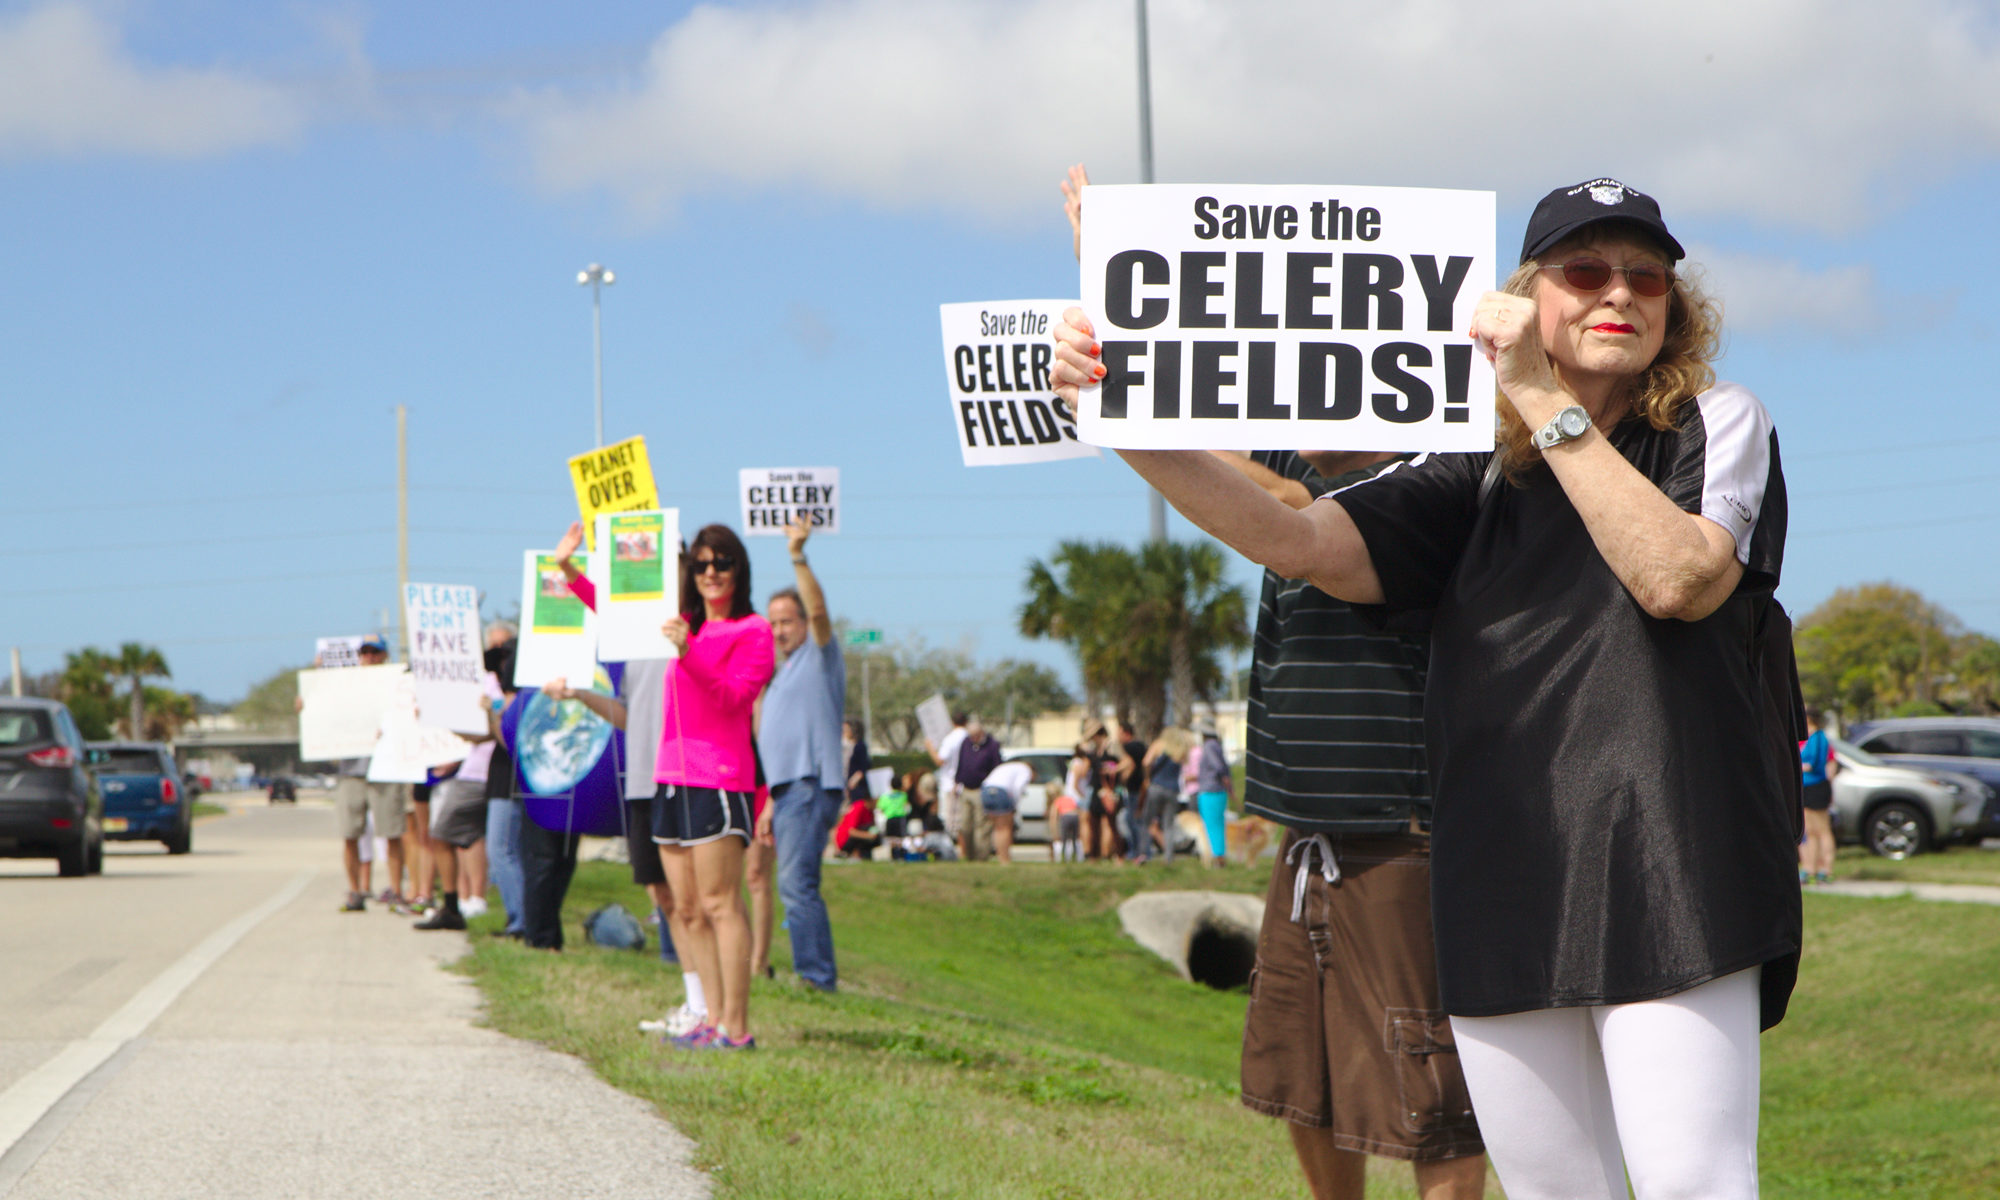 Save the Celery Fields: Protesters on Palmer 2/25/2017